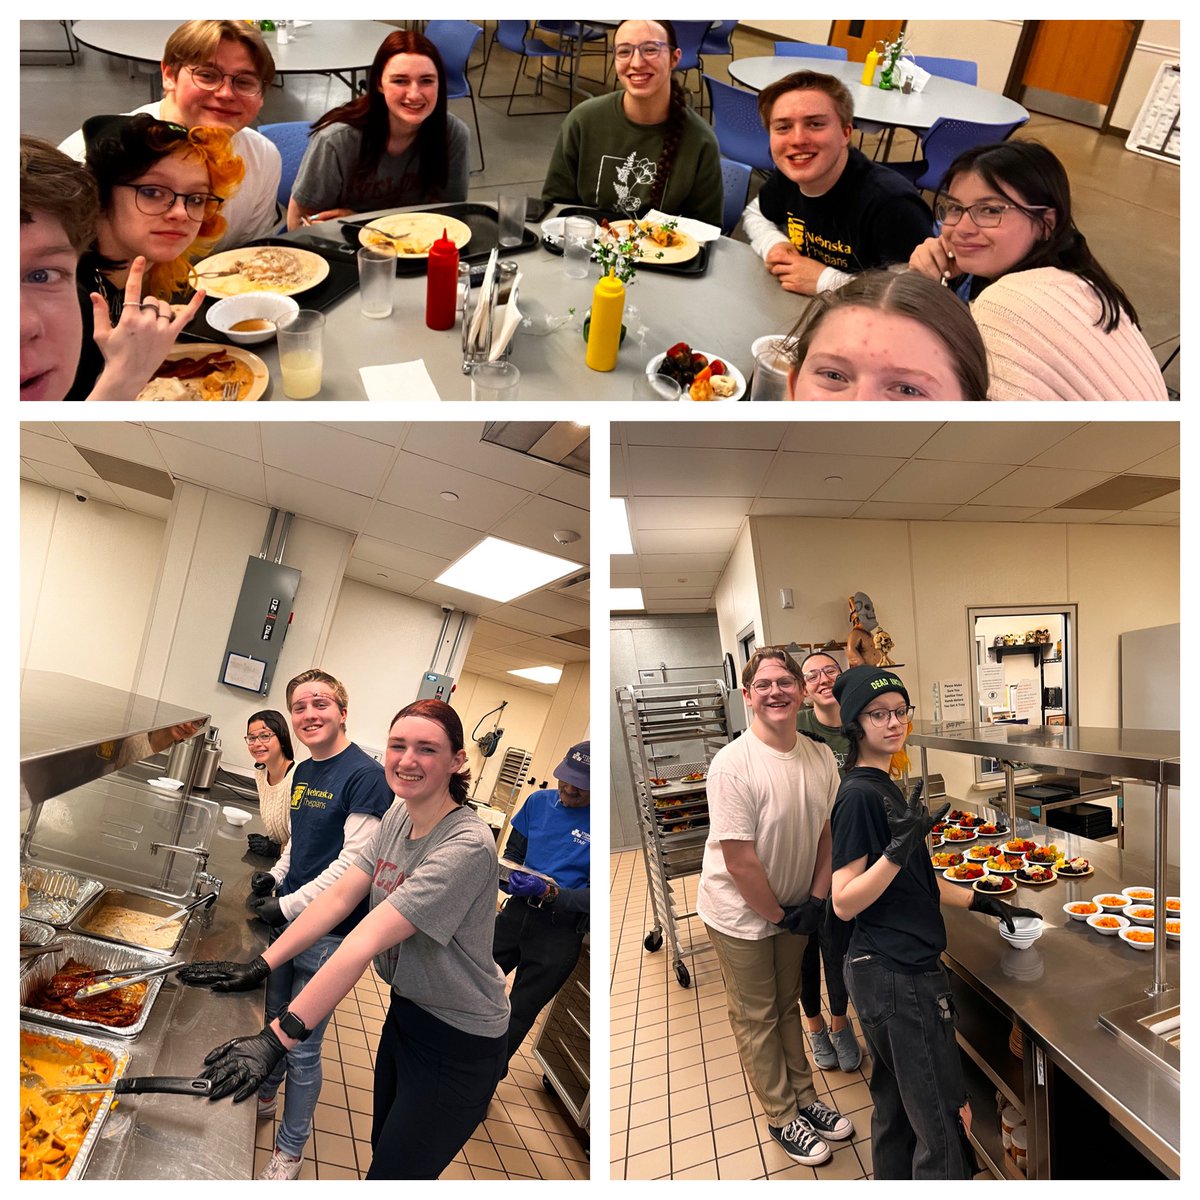 Monarch Thespians added to Theatre in Our Schools Month by giving back. Students volunteered today serving breakfast at The Stephen Center. #TIOS #DoGoodThings #MonarchNation